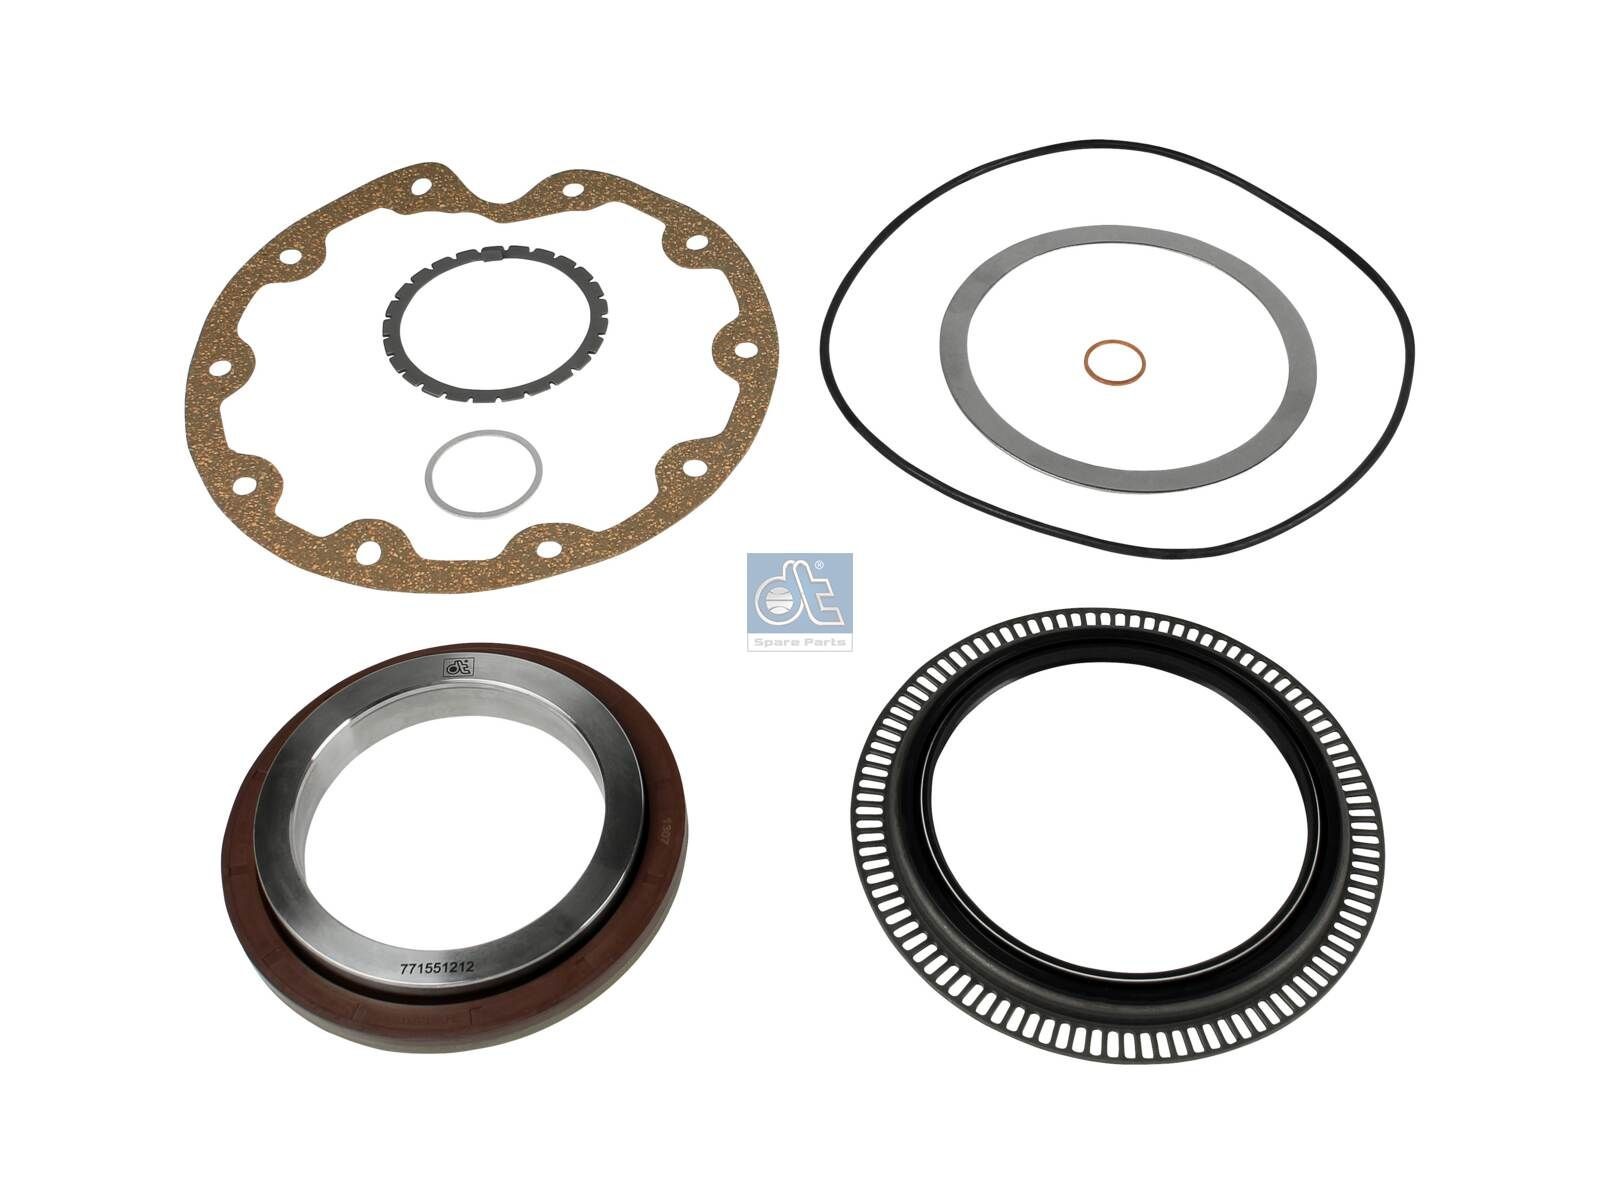 DT Spare Parts 4.91023 Gasket Set, planetary gearbox 940 350 01 35